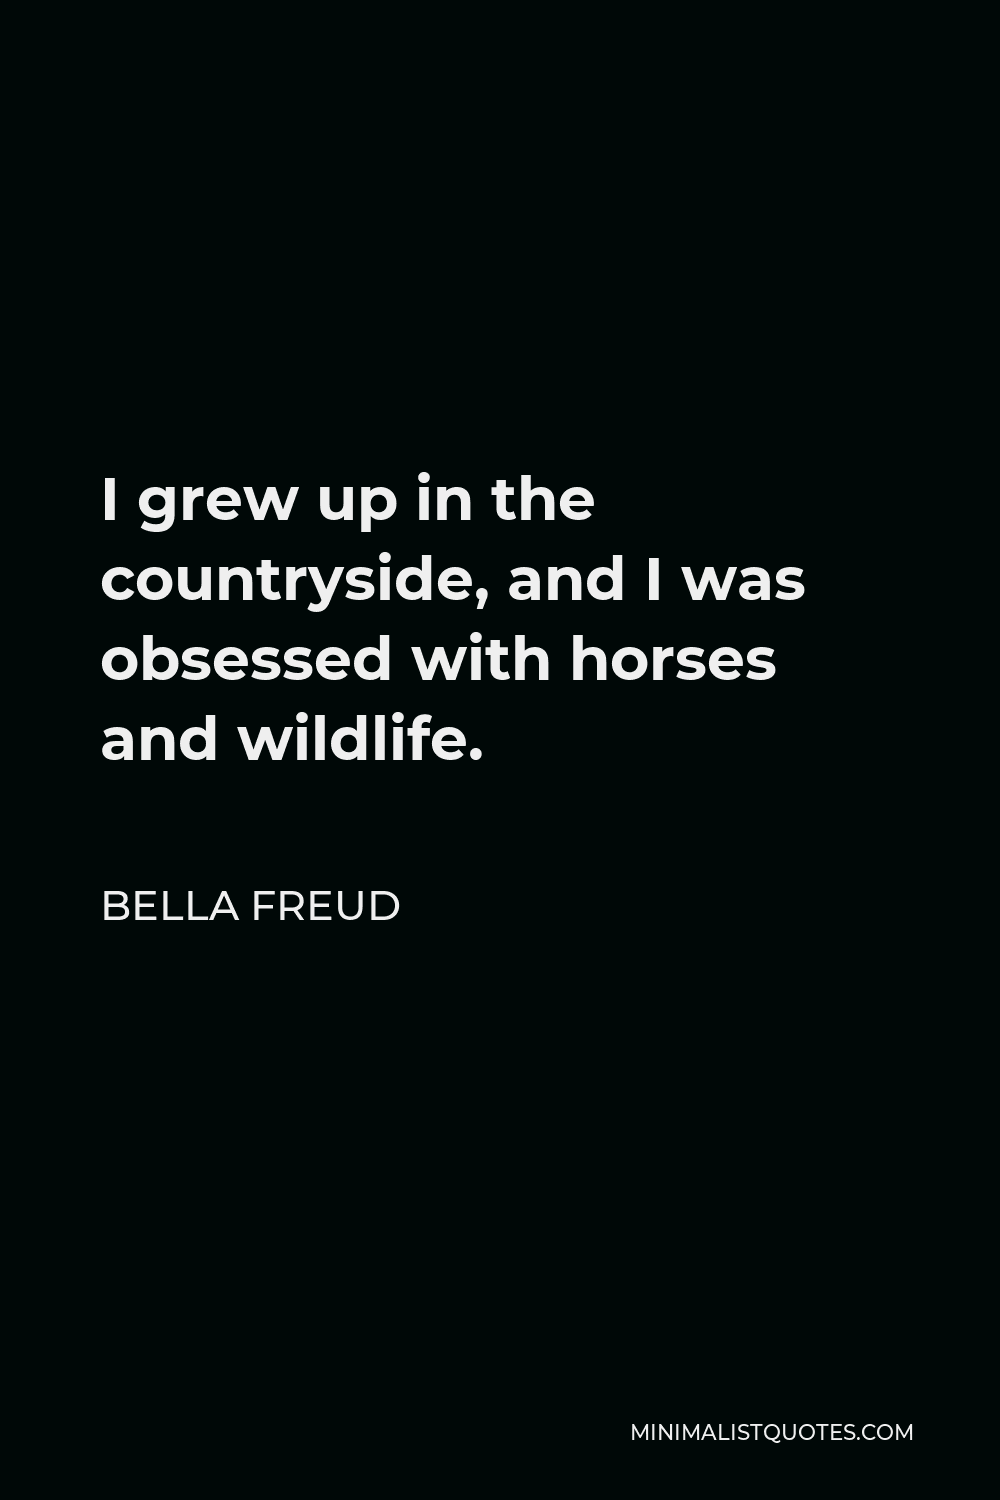 Bella Freud Quote - I grew up in the countryside, and I was obsessed with horses and wildlife.